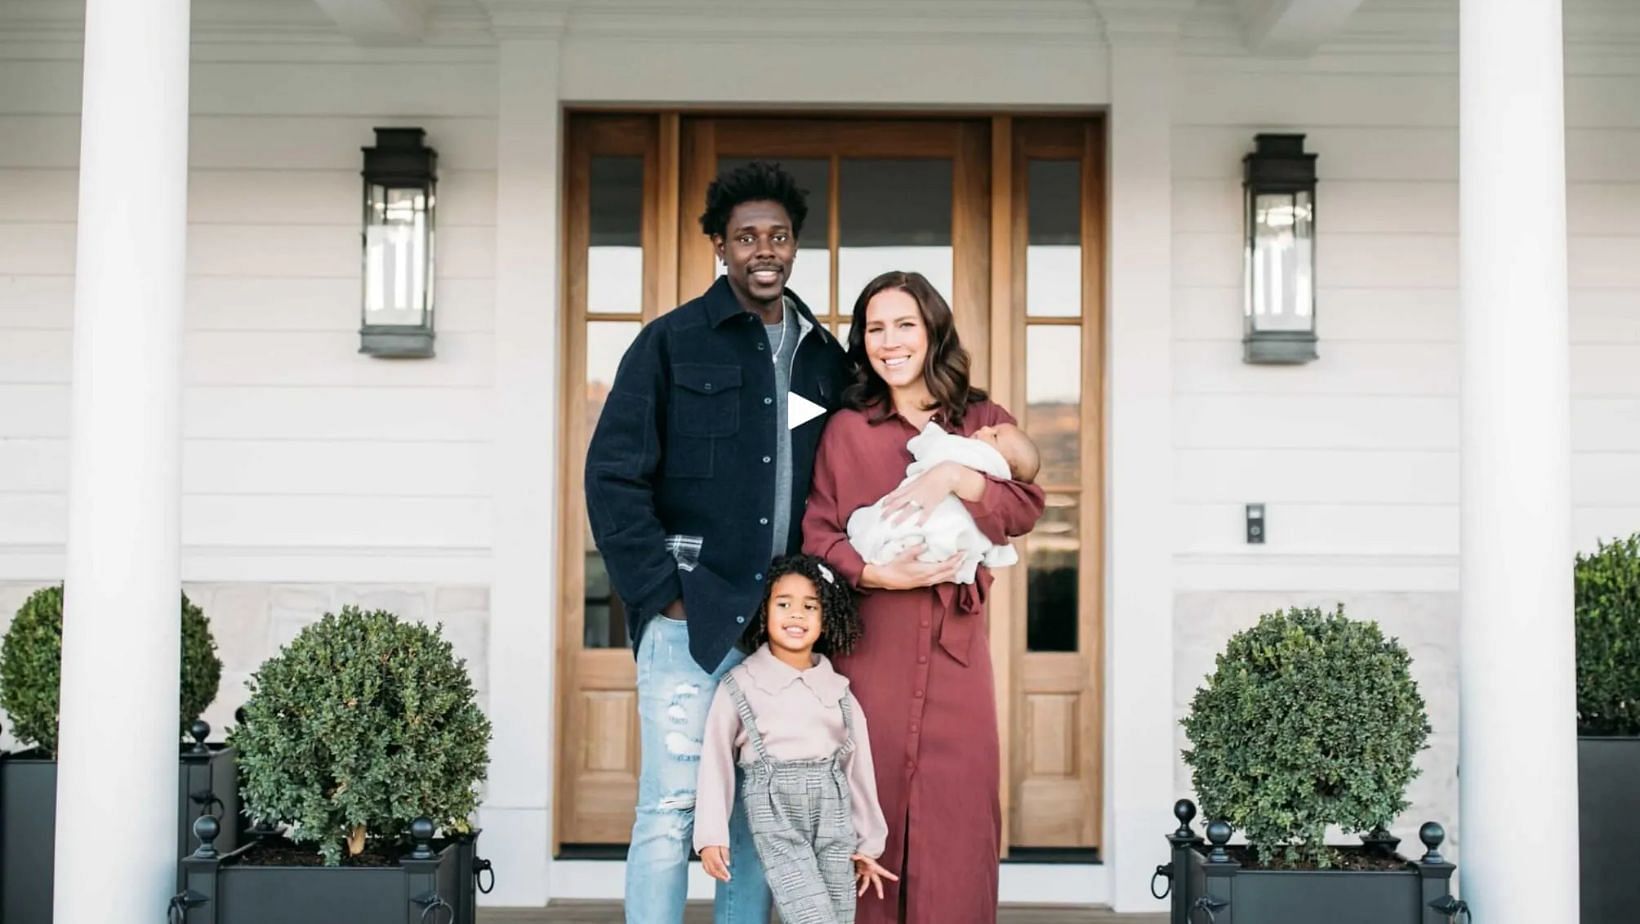 Jrue Holiday's Wife Lauren Holiday and Her Battle with Brain Tumor